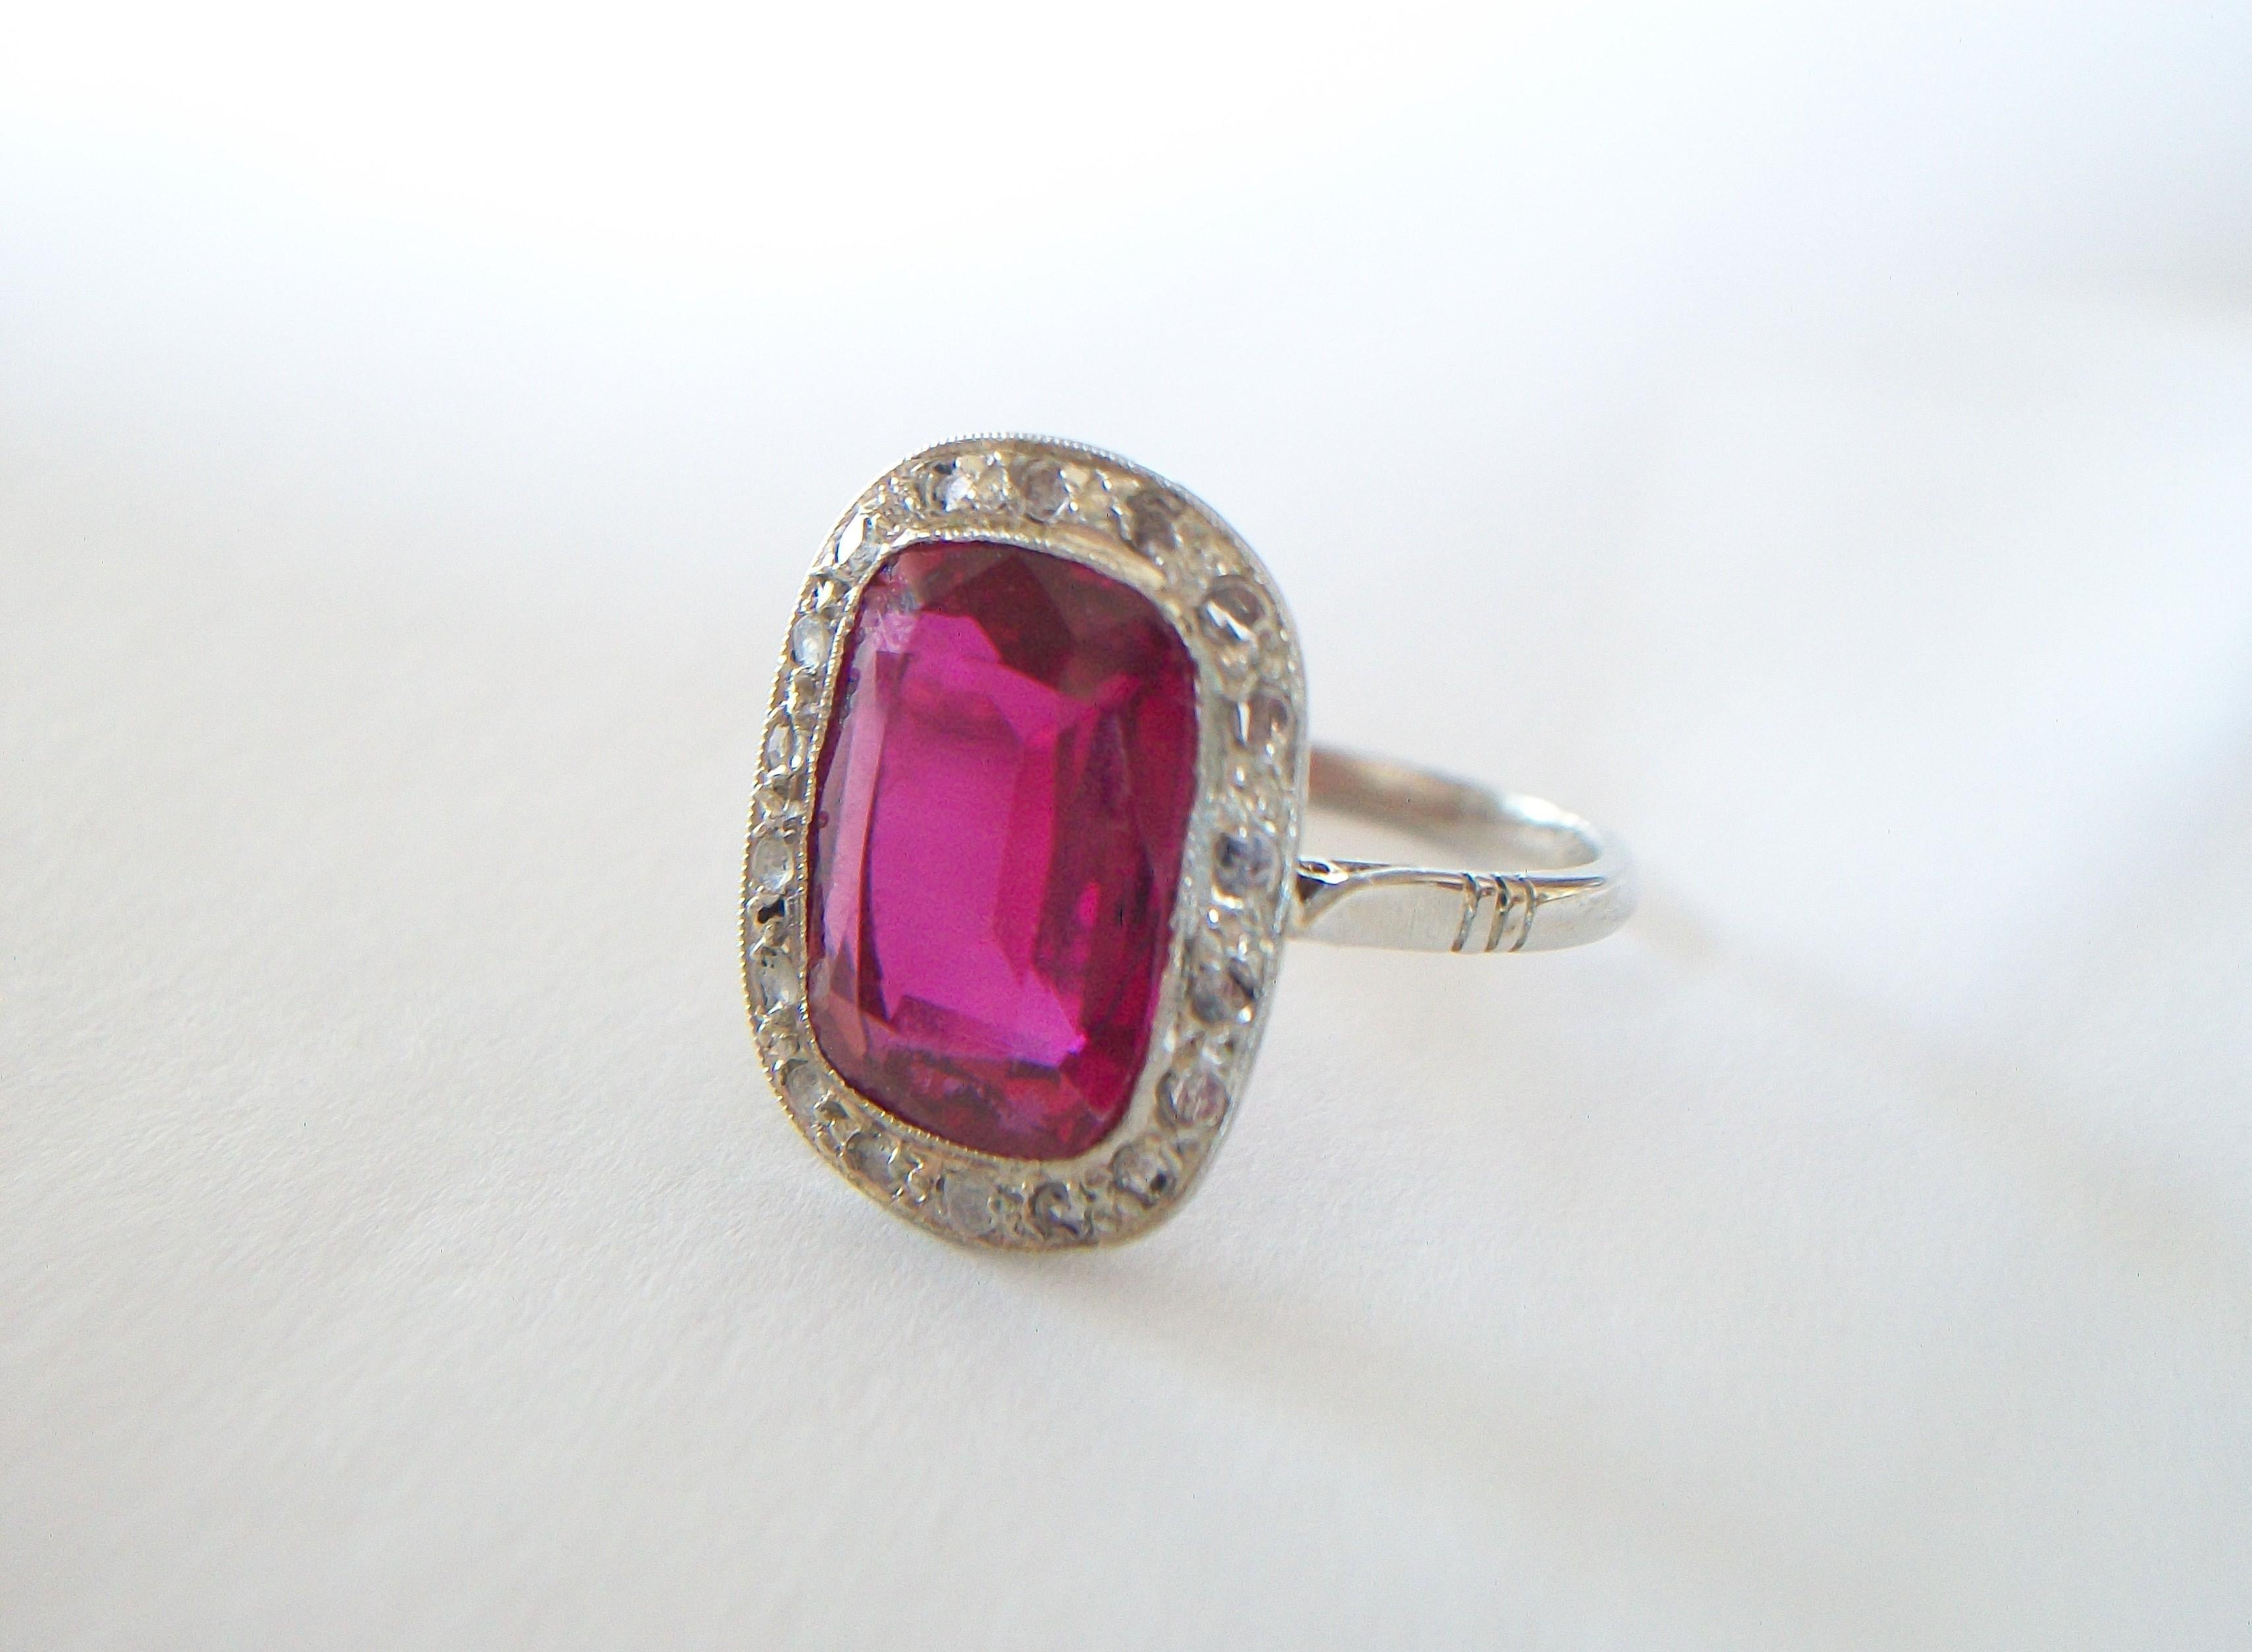 French Art Deco Synthetic Ruby & Diamond Halo Ring, 18K Gold, Circa 1920's For Sale 4